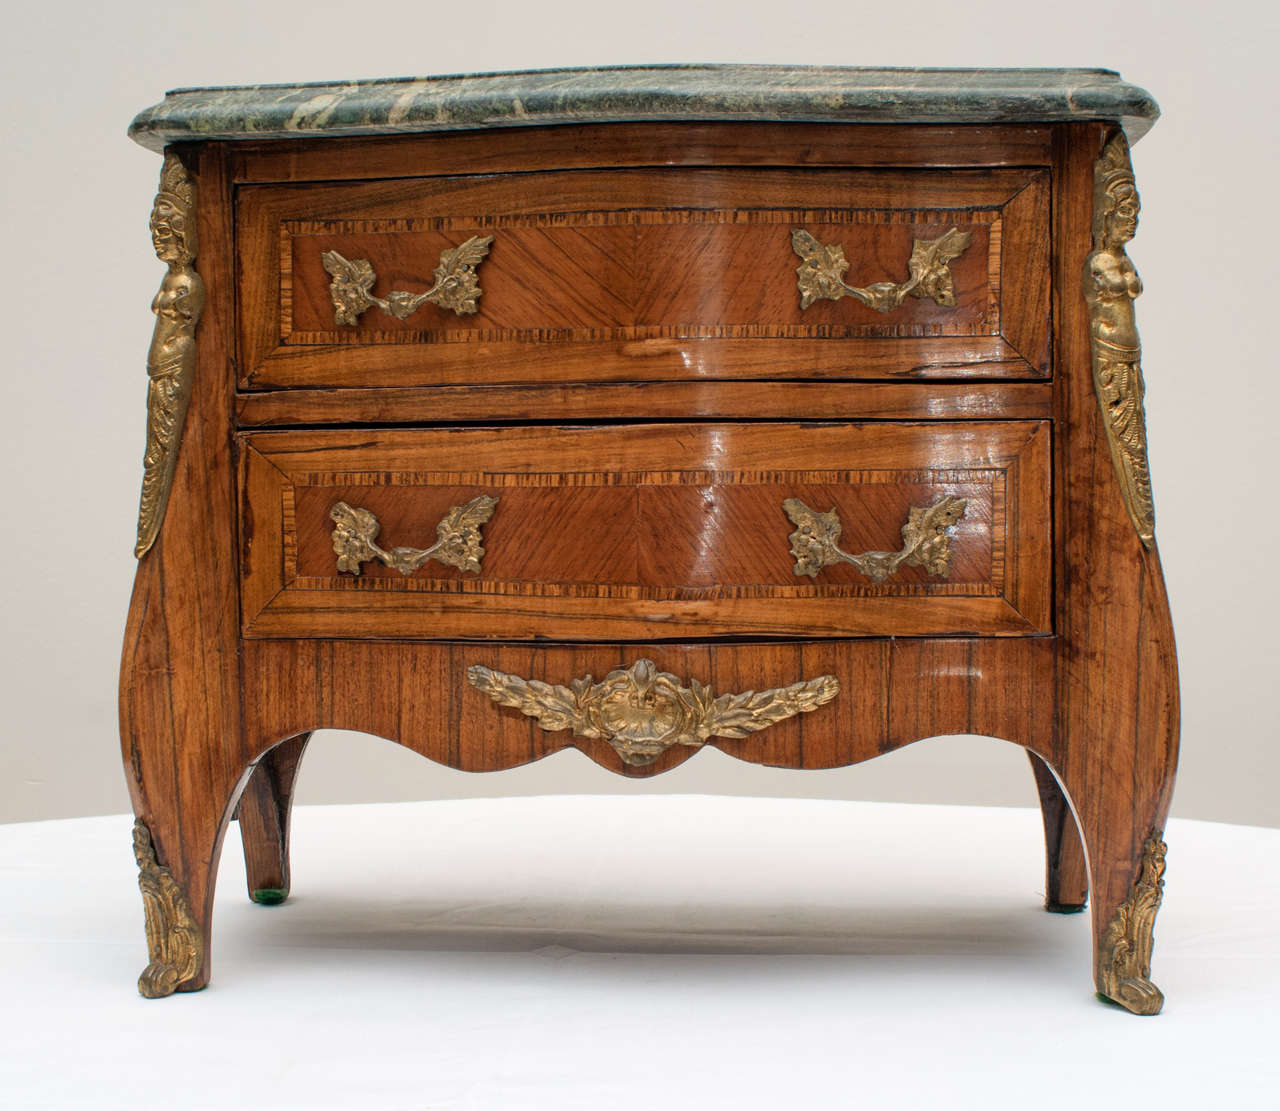 A Fine French 19th c. Louis XV style Kingwood Parquetry Inlaid miniature bronze mounted two drawer commode, having a shaped Green marble top above a conforming case with two bookmatch parquetry inlaid drawers, the sides similarly inlaid, shaped